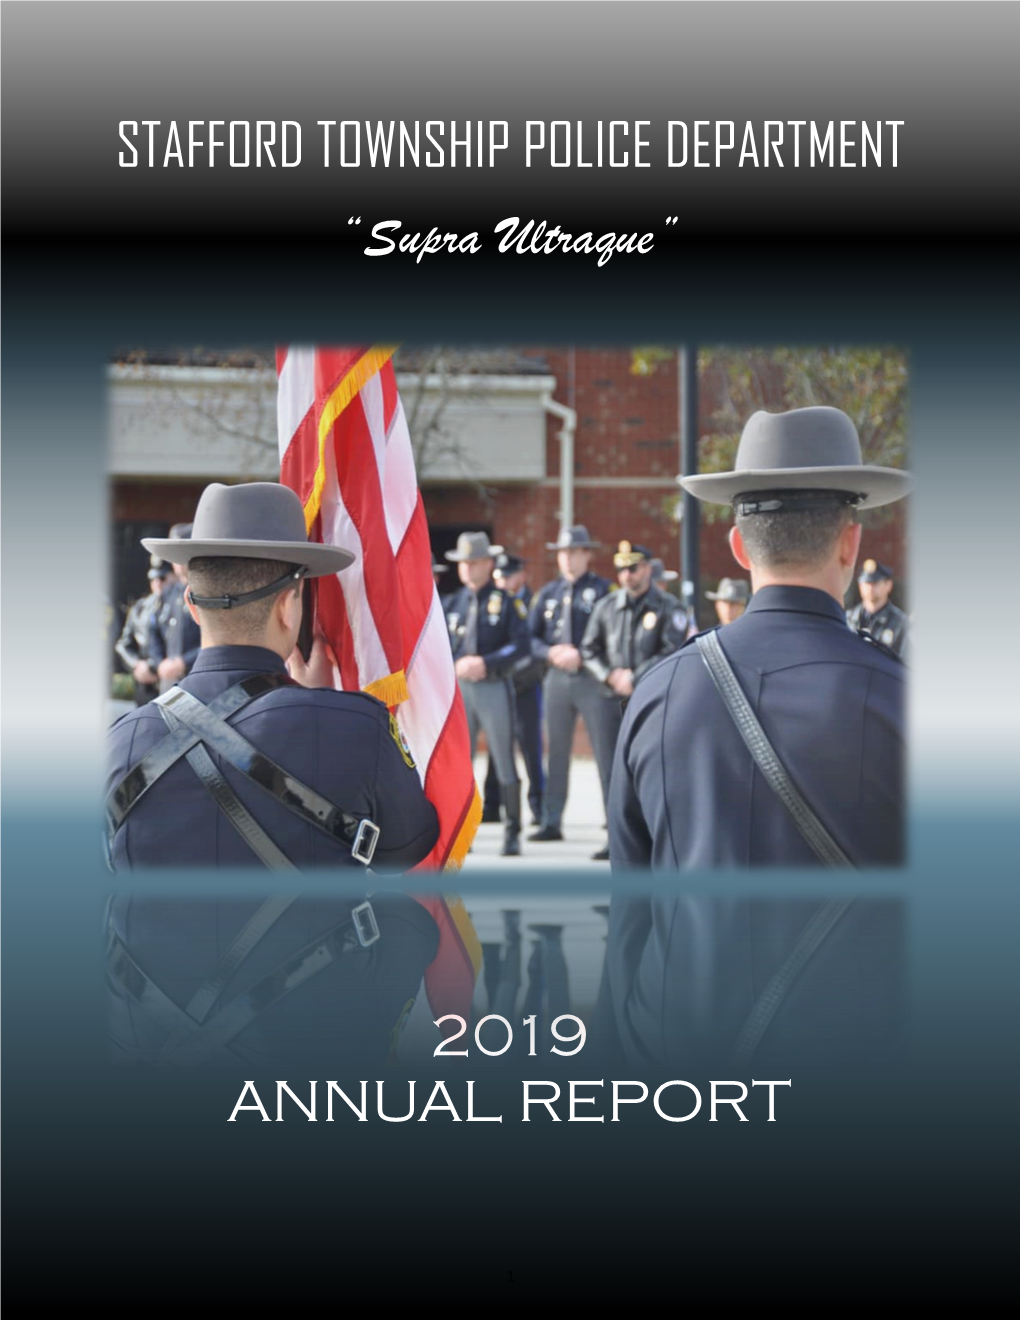 Stafford Township Police Department 2019 Annual